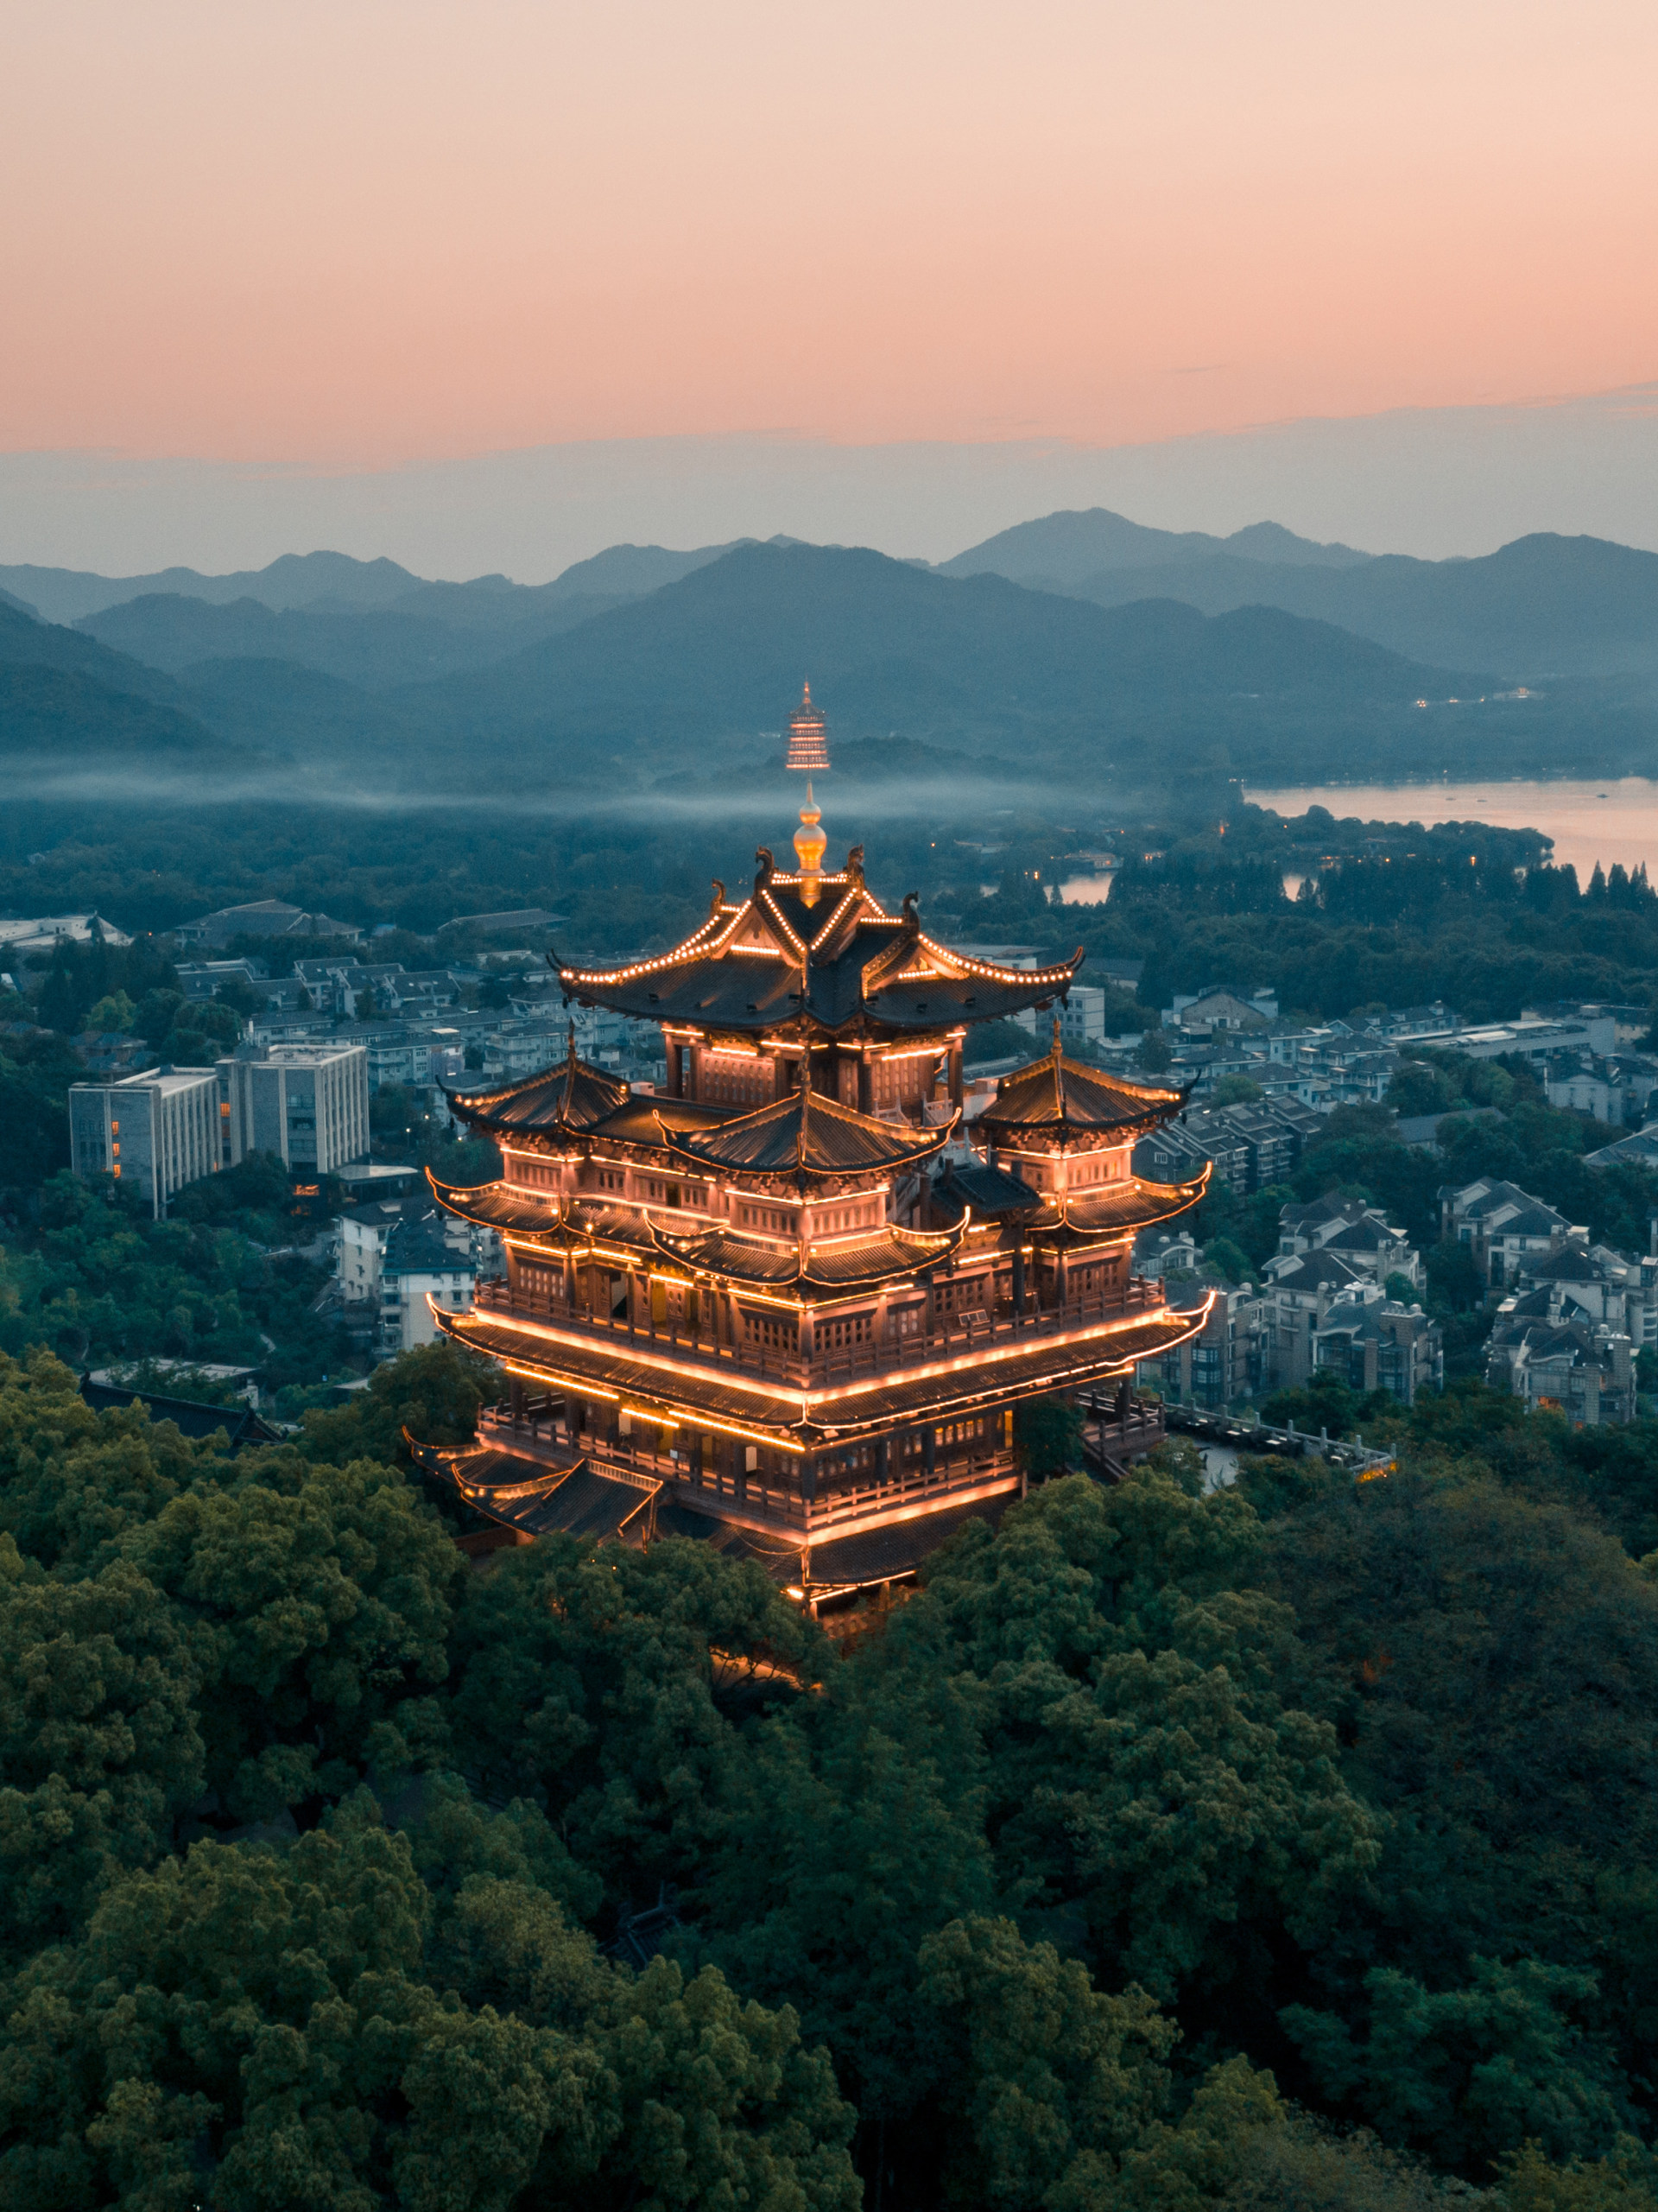 overview, temple, cities, architecture, city, building, review, pagoda cellphone